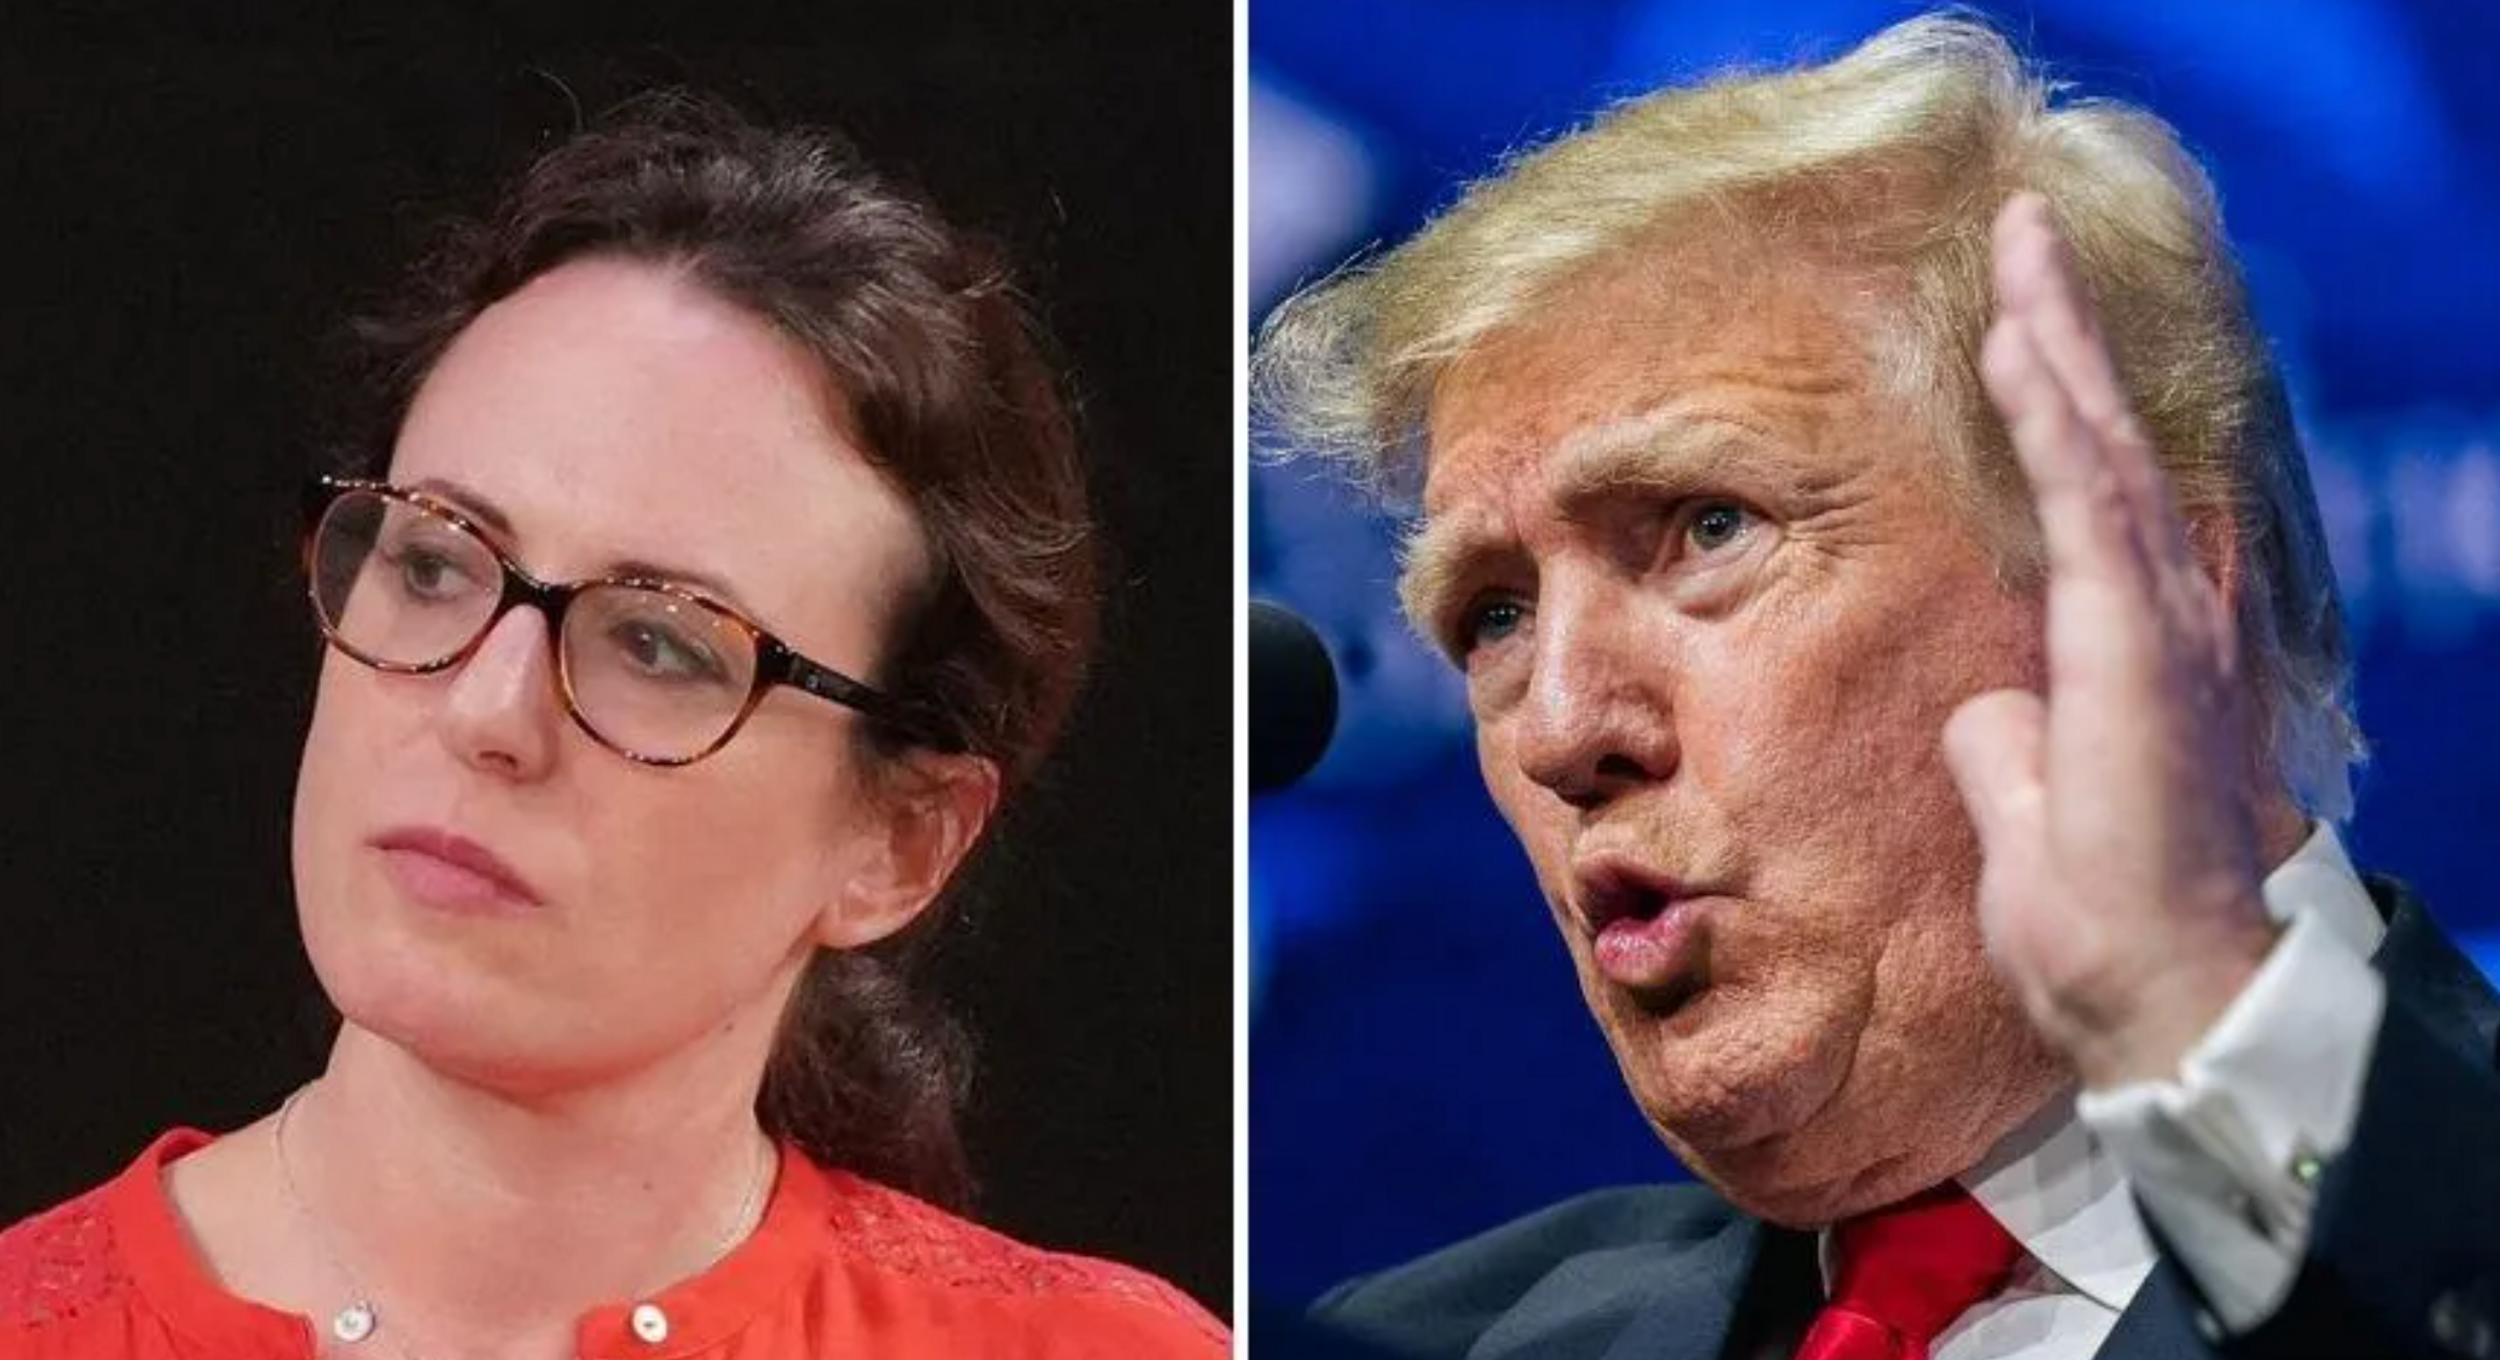 Trump Calls NYT Reporter 'Maggot' in Unhinged Statement After She Exposes His Flushing Docs